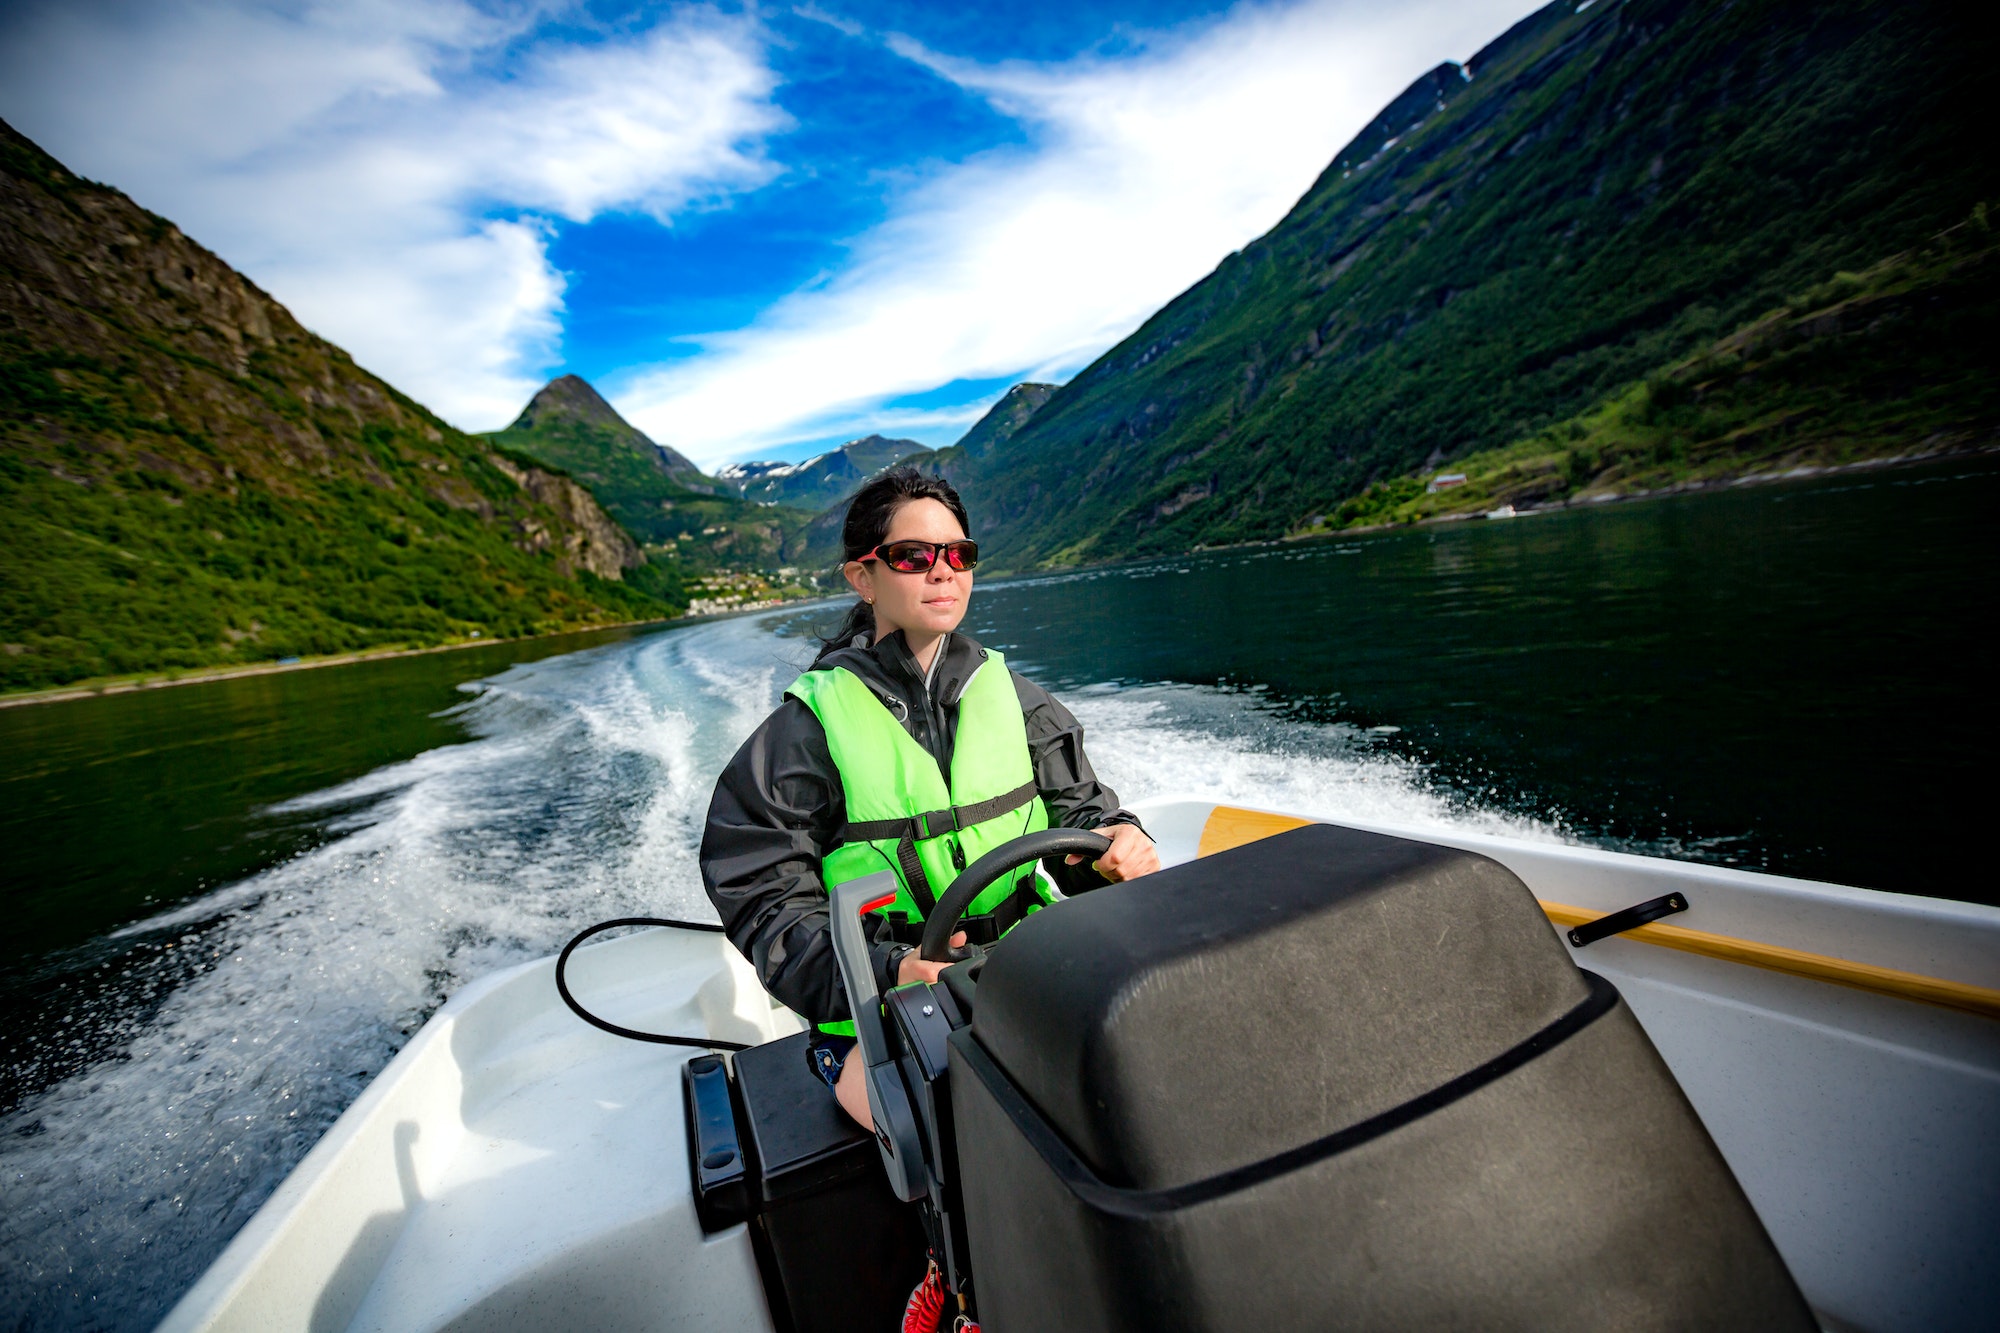 Woman driving a motor boat